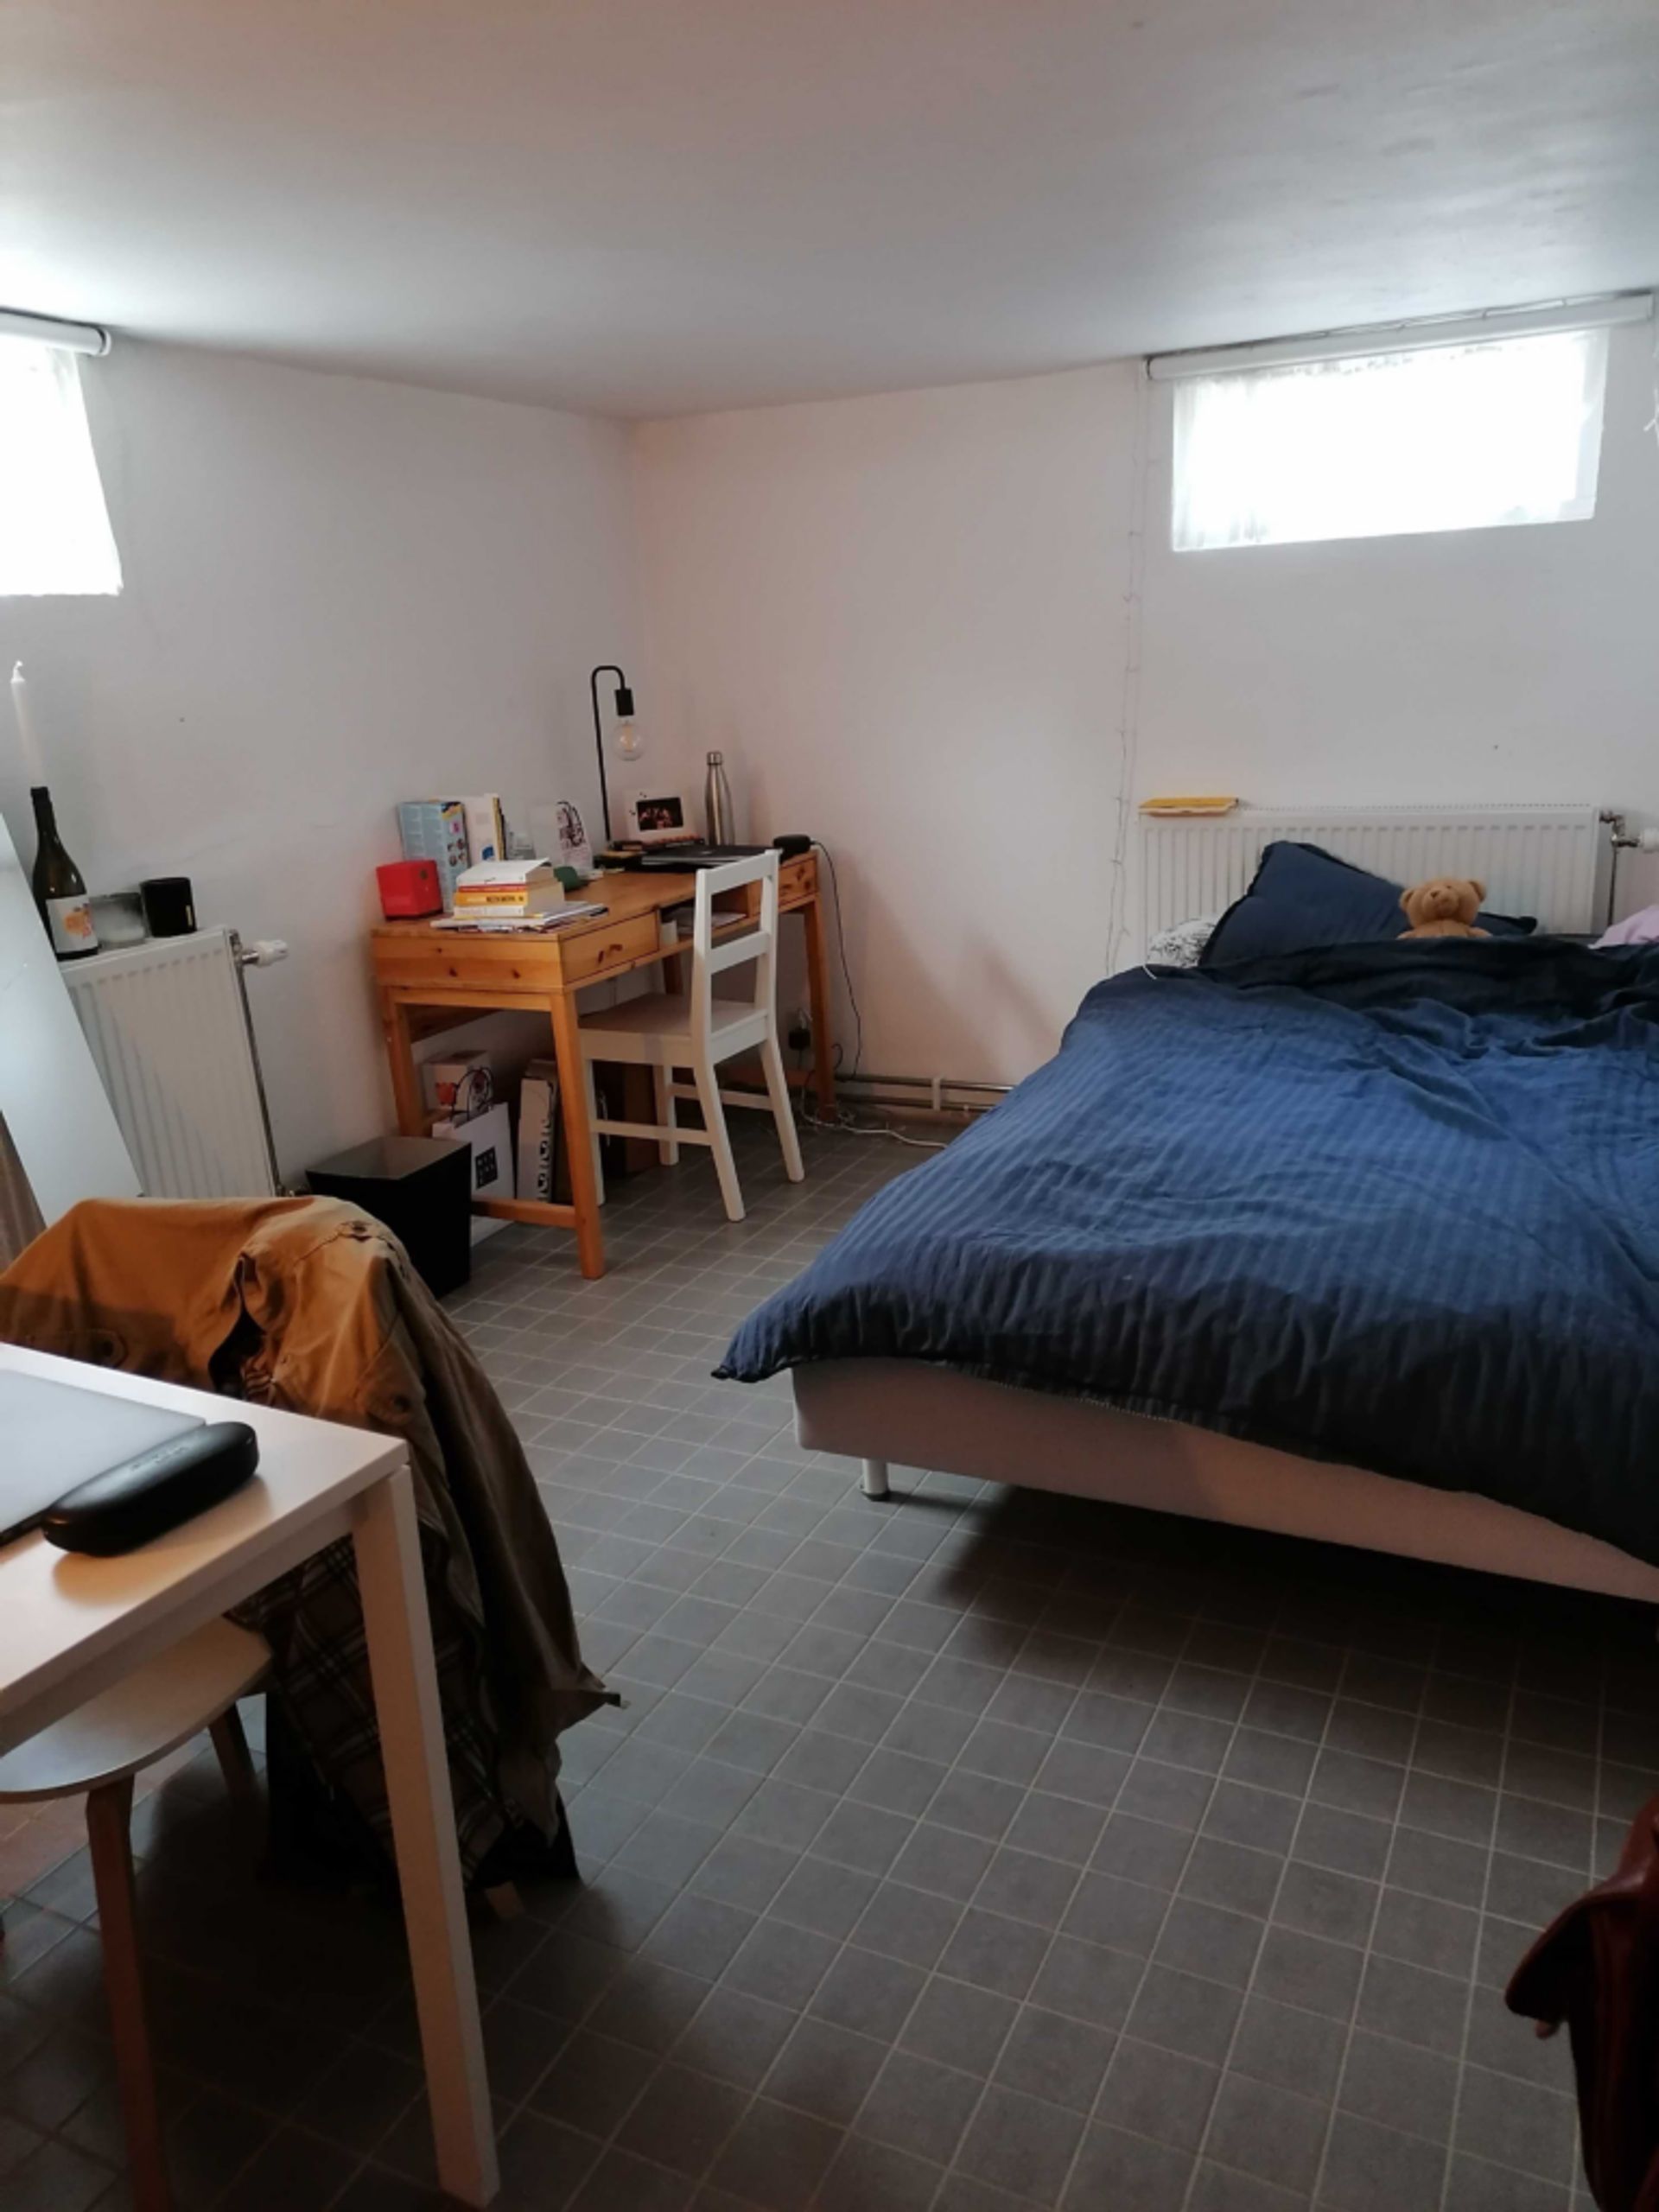 An accommodation in the basement with double bed, desk and a chair. 